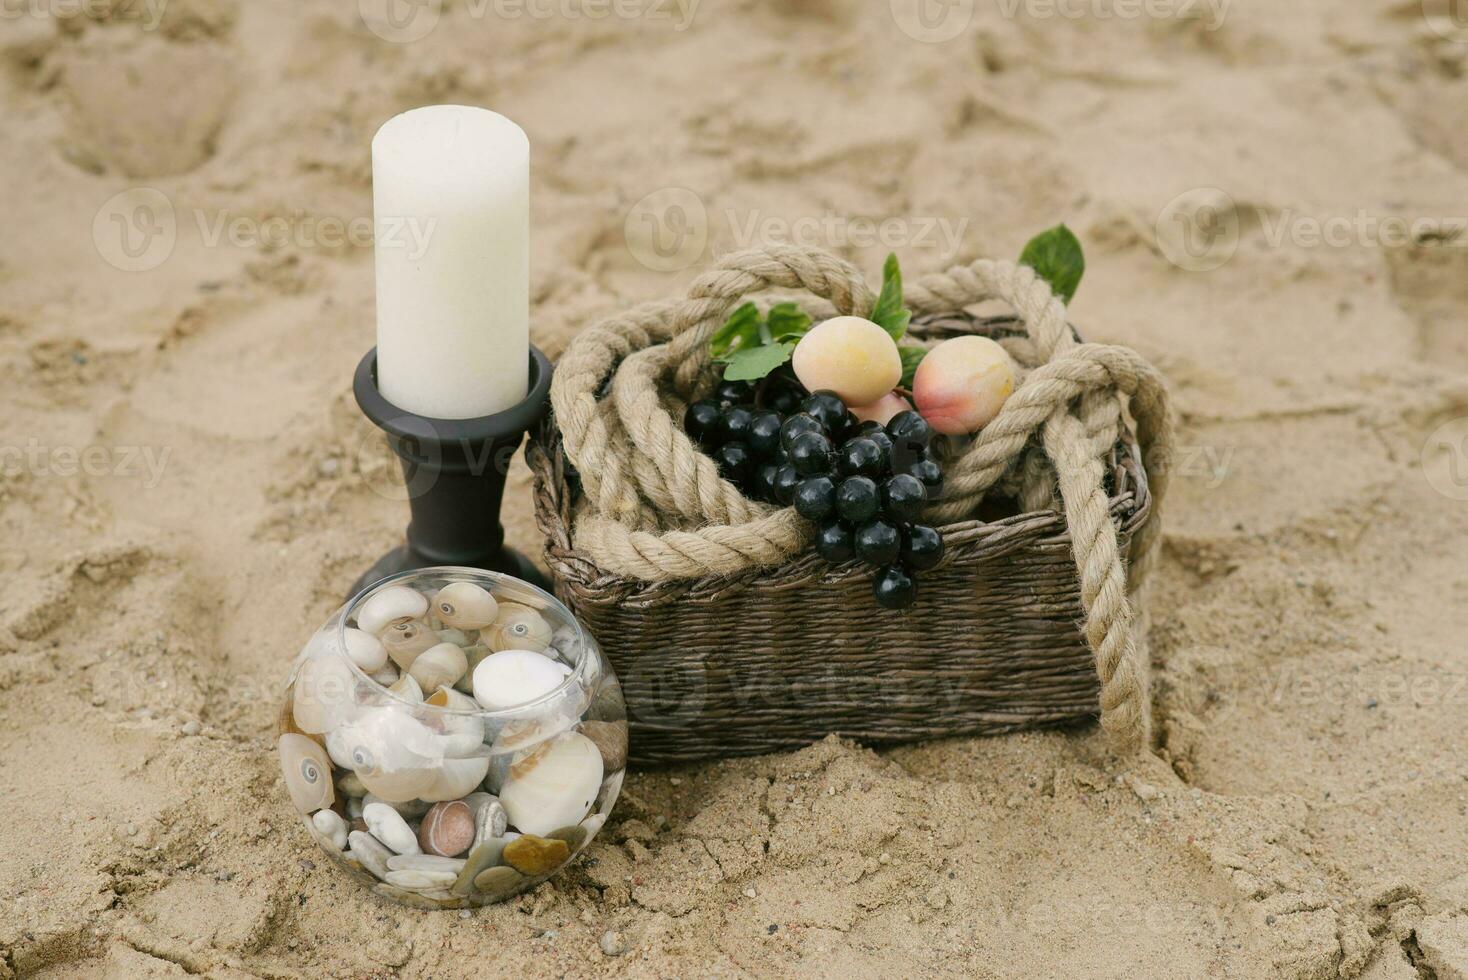 Fruits are in a basket, a candle, sea stones in a glass vase. Decor of a romantic dinner by the sea or ocean photo